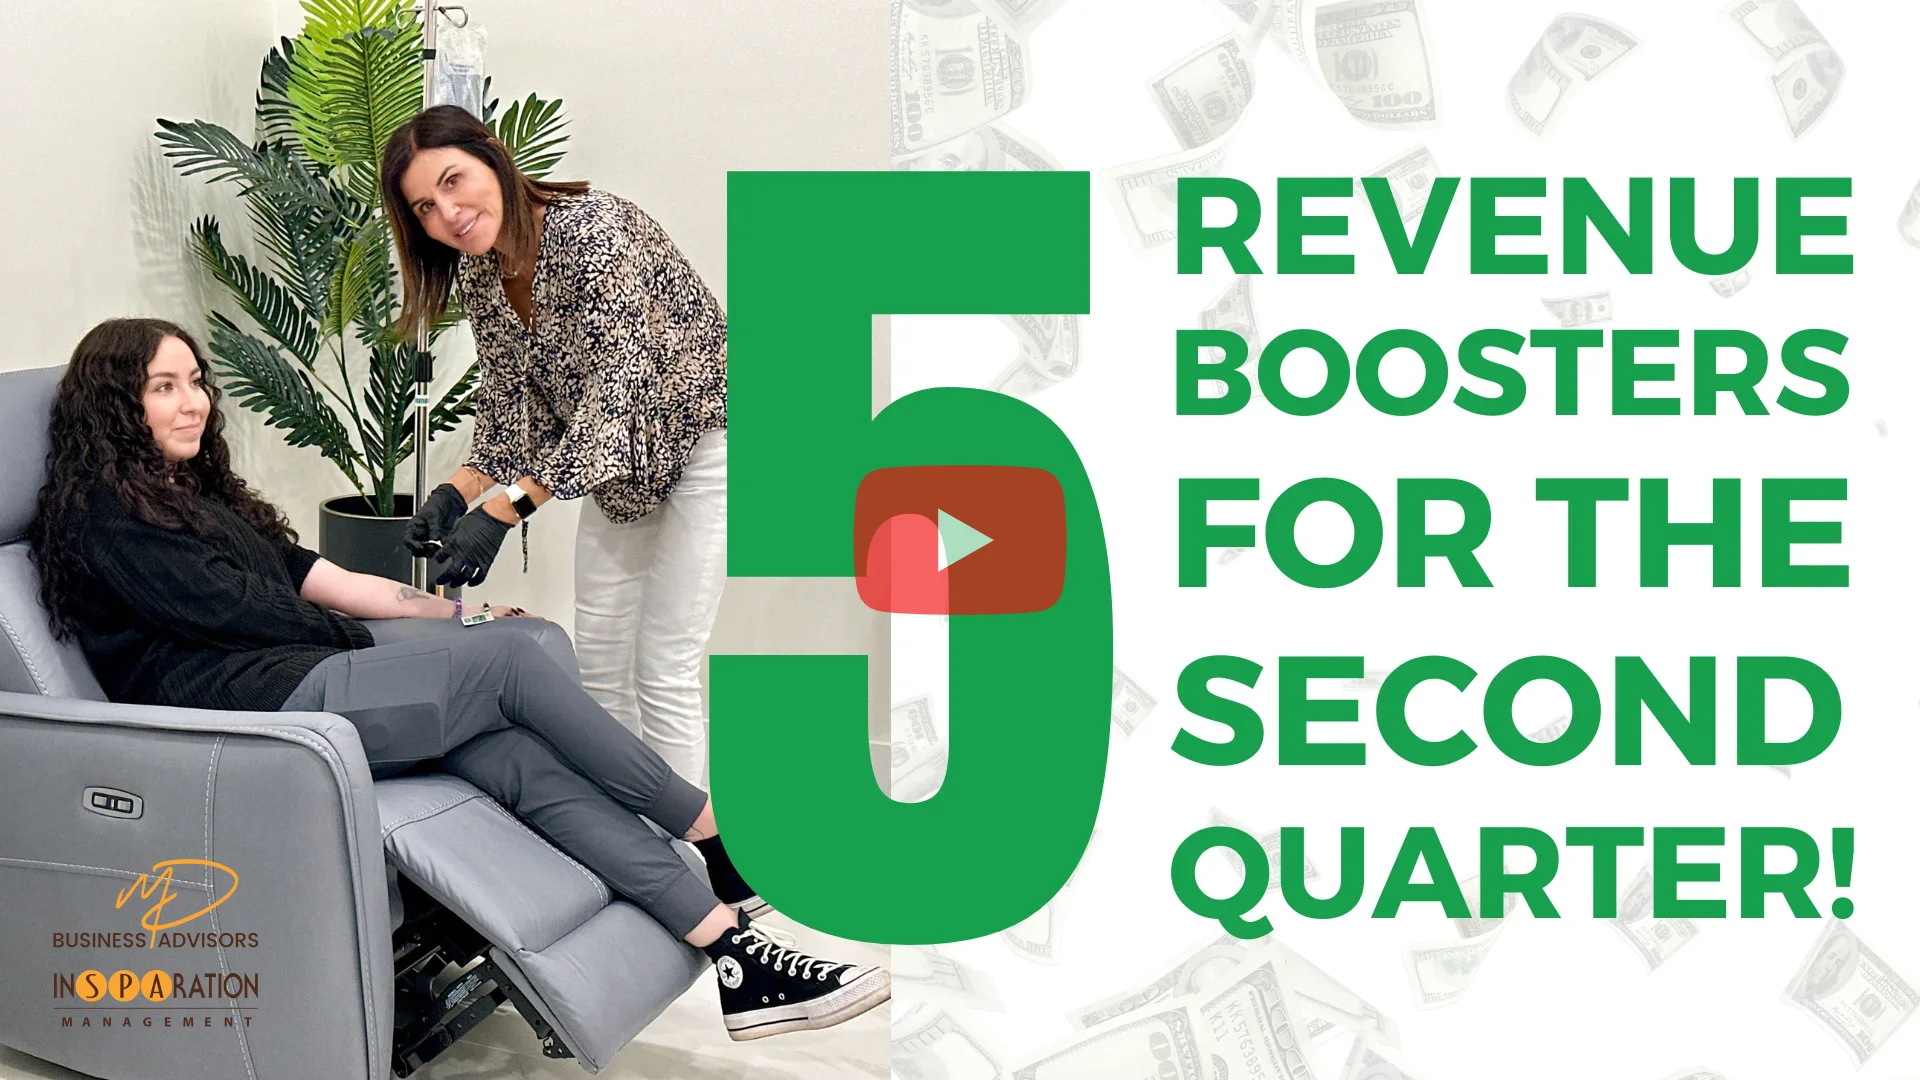 5 Revenue Boosters For The Second Quarter!